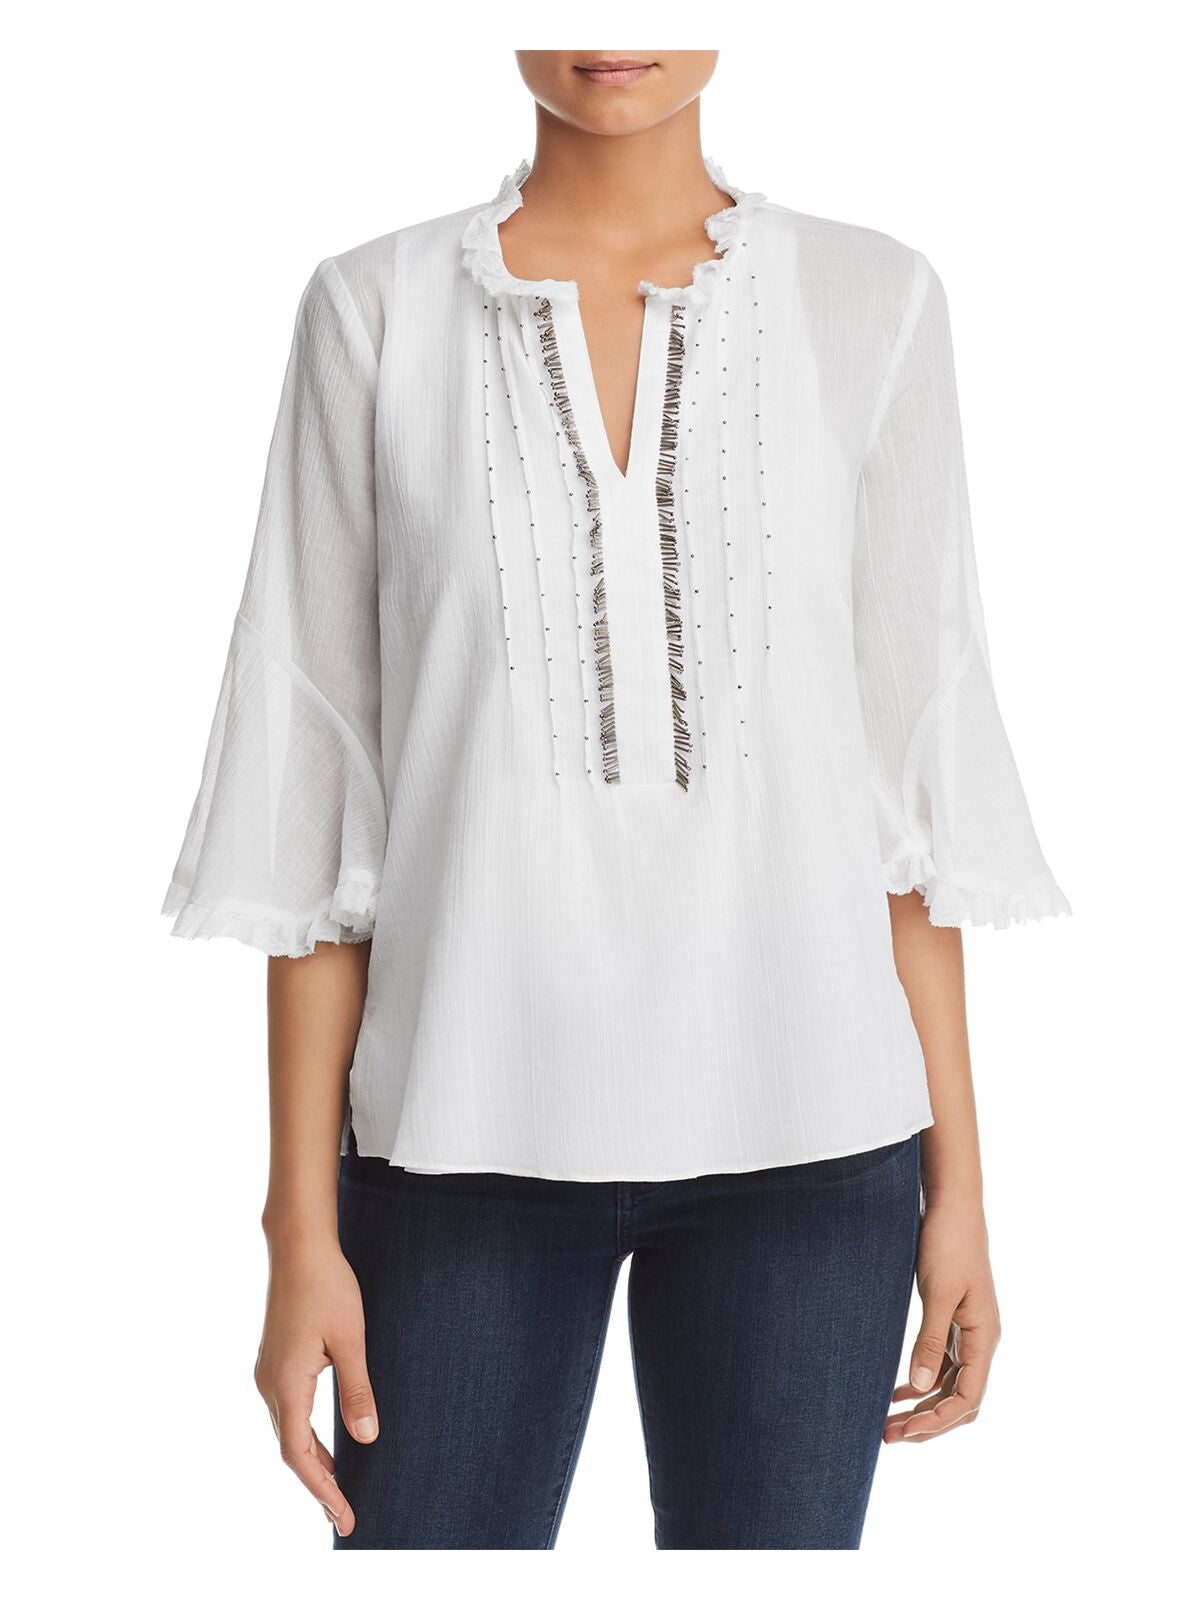 LE GALI Womens White Embellished Bell Sleeve Top Size: XS